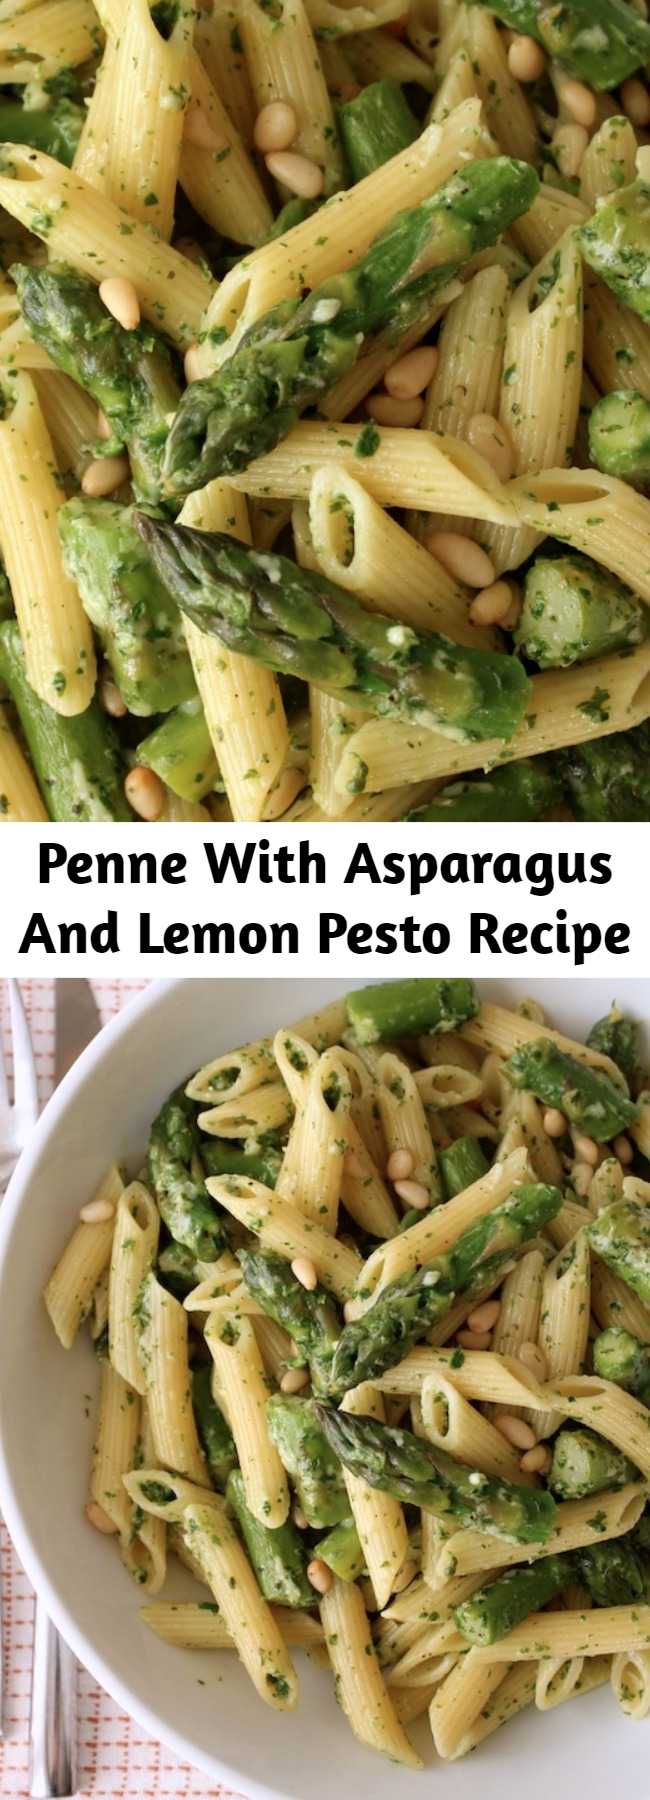 Penne With Asparagus And Lemon Pesto Recipe - A bright and lemony pesto sauce with penne and asparagus. A quick and easy spring meal.